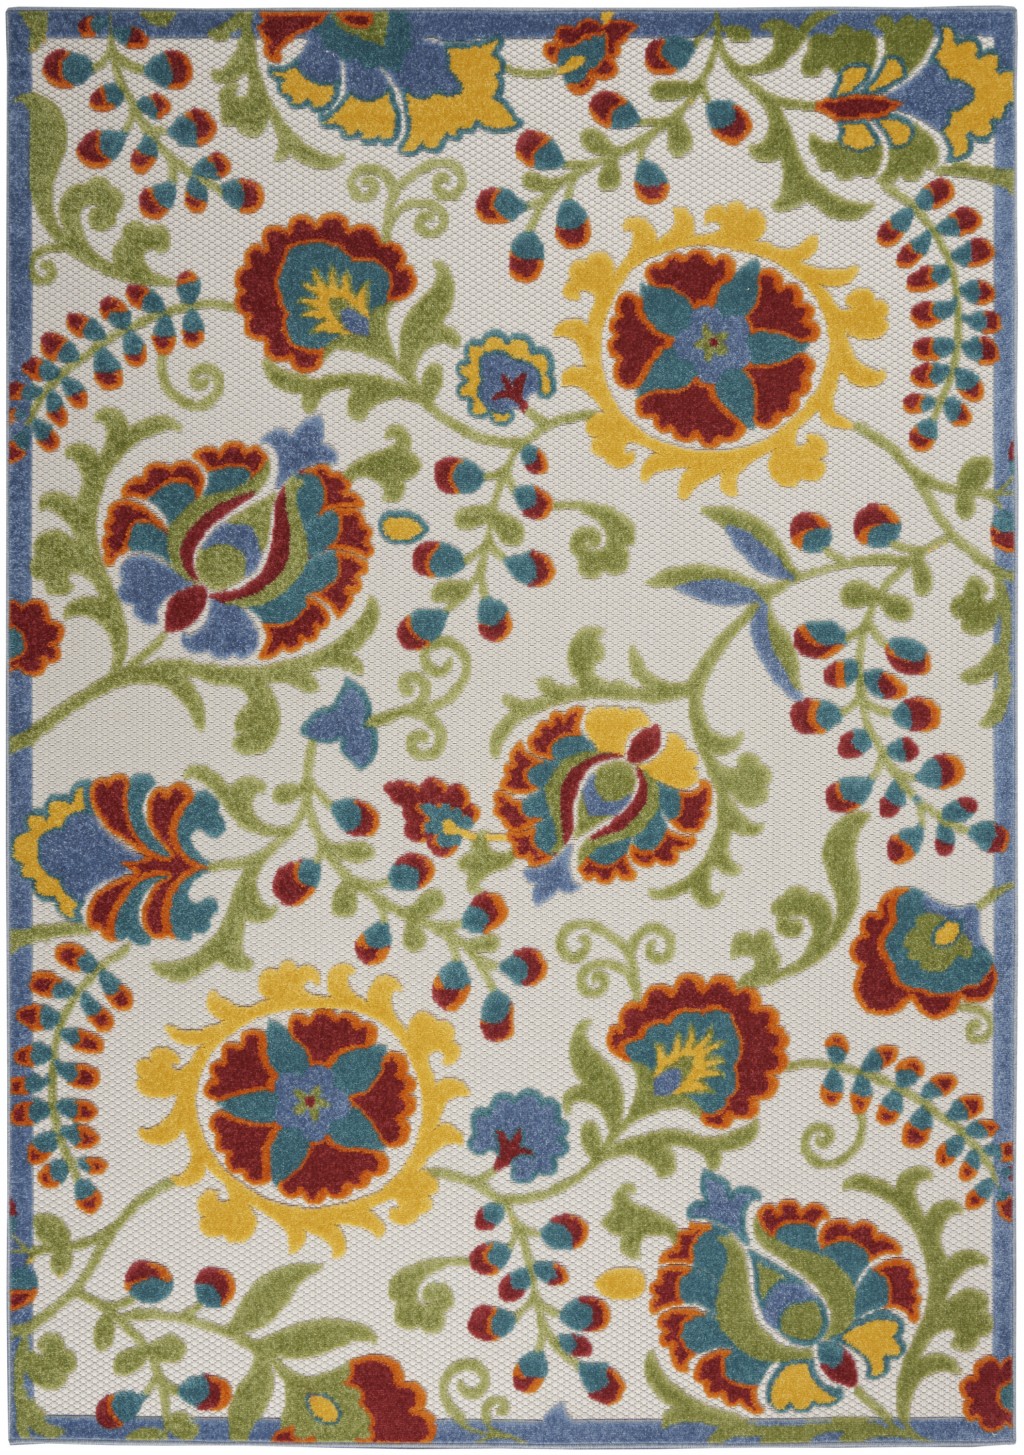 5' X 7' Ivory/Multi Floral Indoor Outdoor Area Rug-384846-1